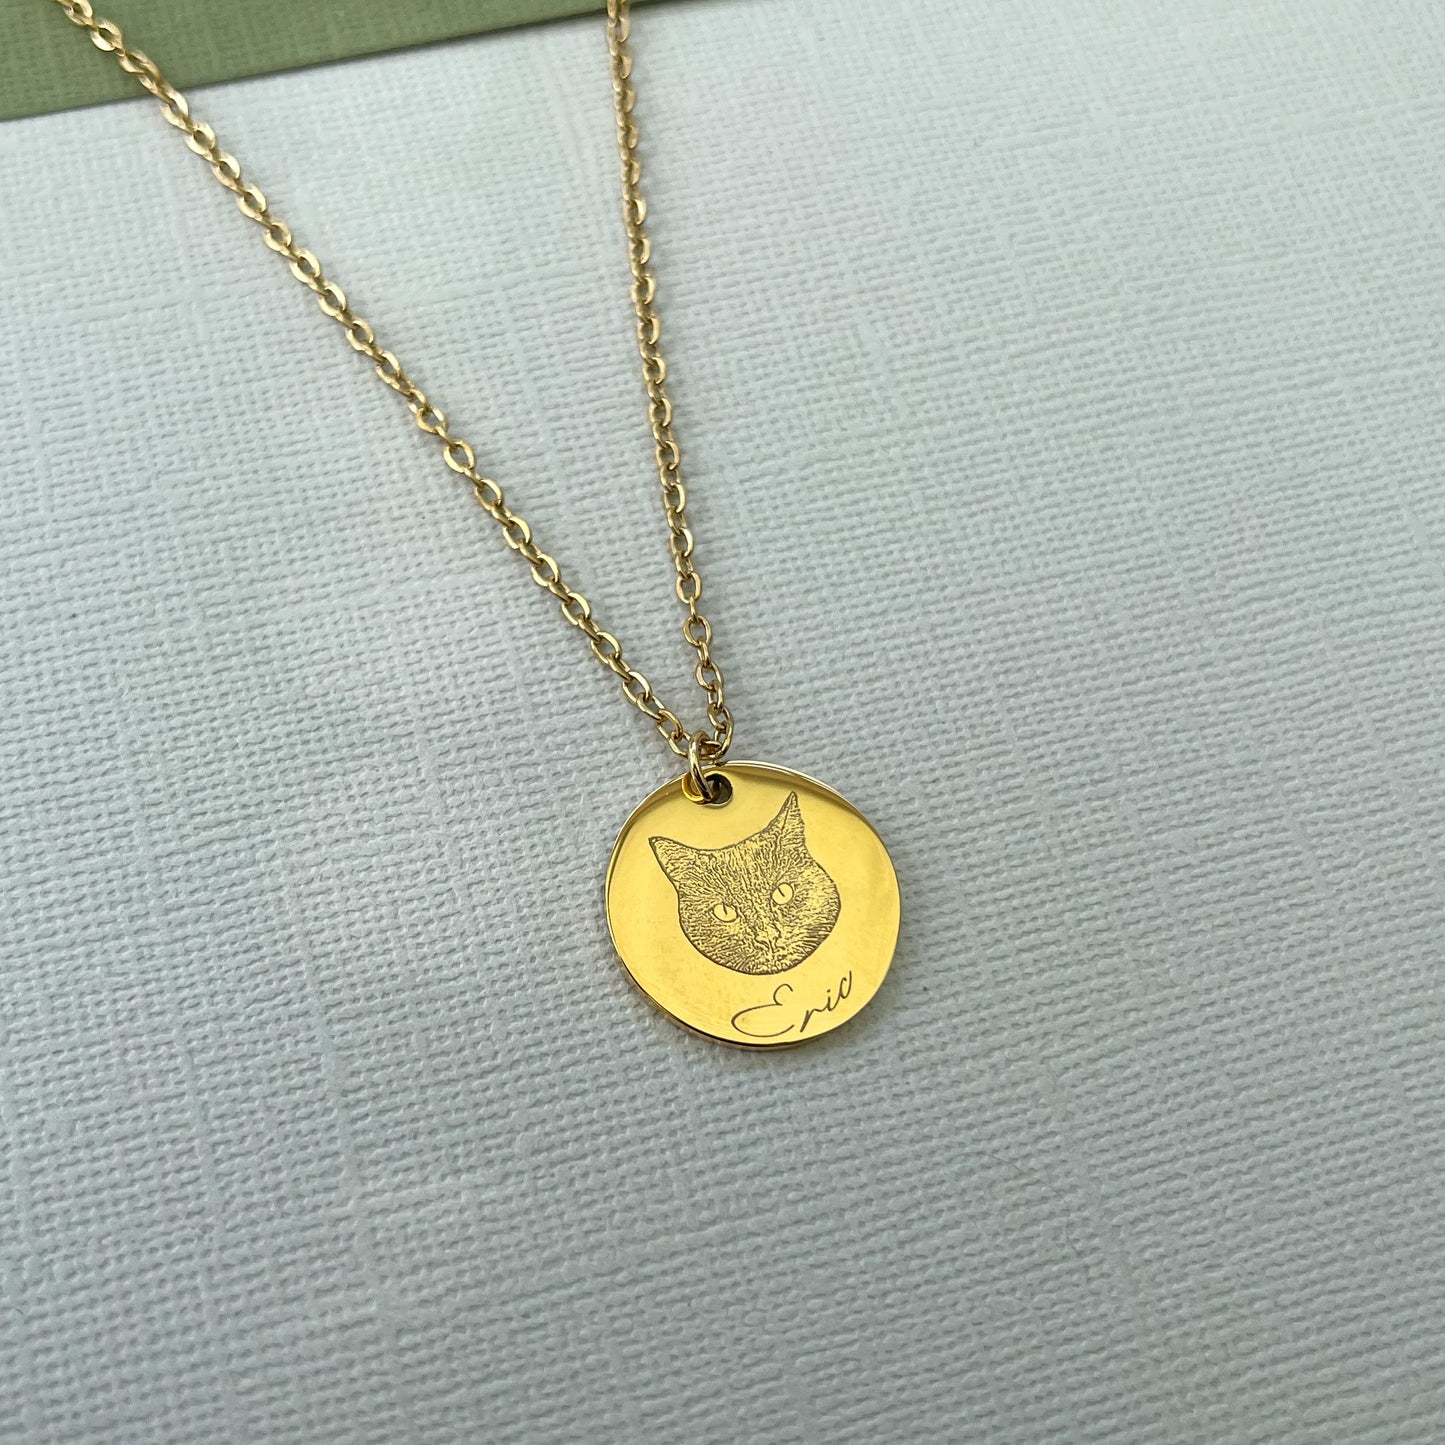 An example of a personalised necklace. A gold necklace with a cat engraved with the name Eric  below.